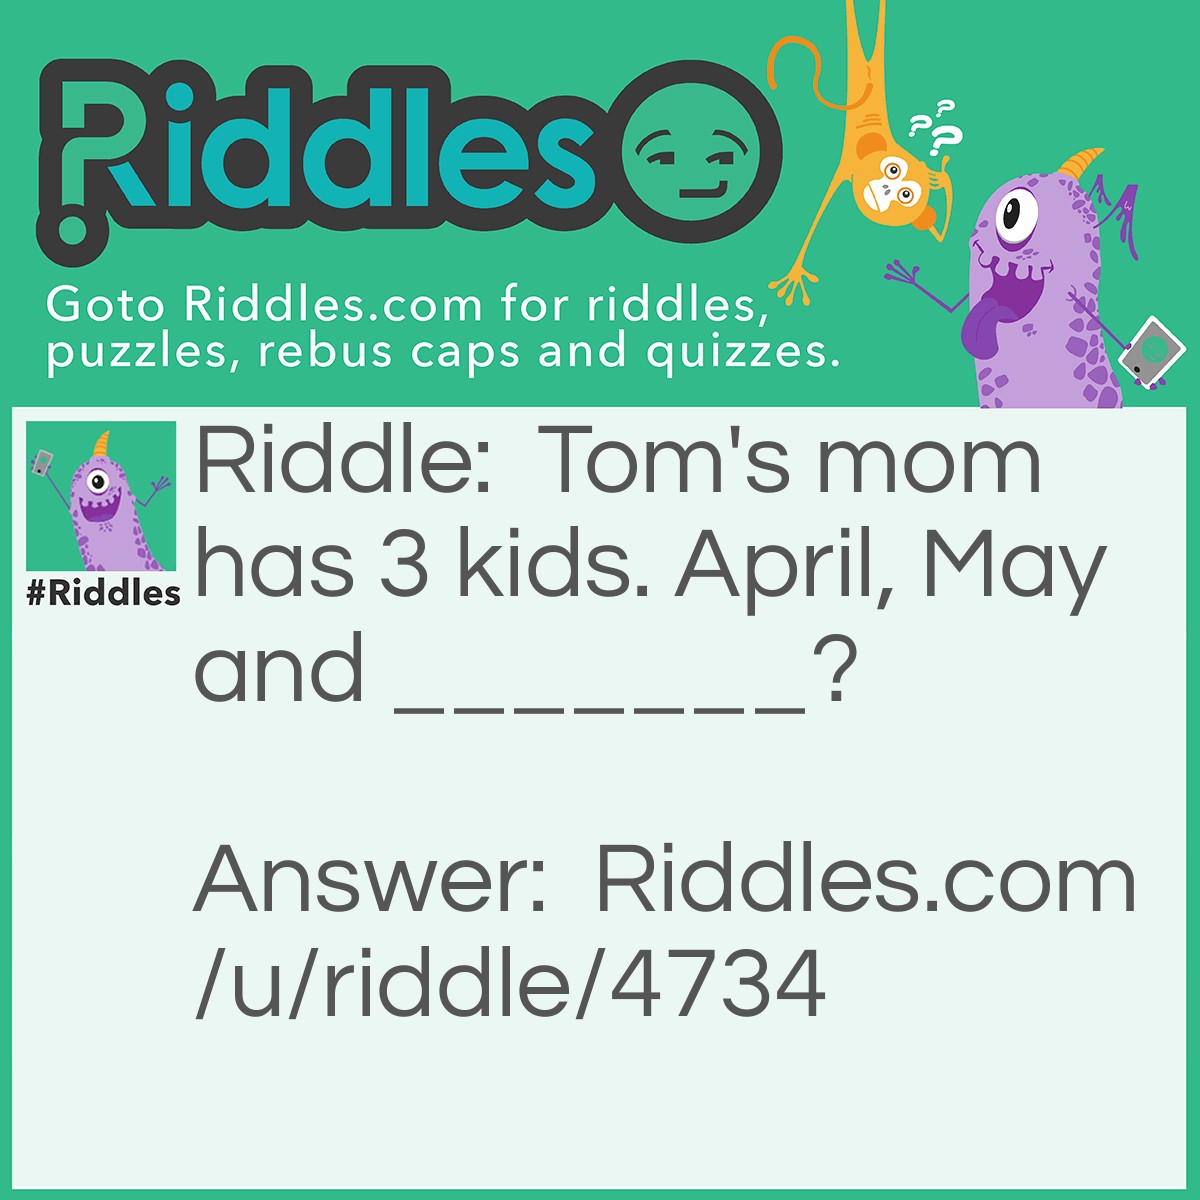 Riddle: Tom's mom has 3 kids. April, May and _______? Answer: Tom.